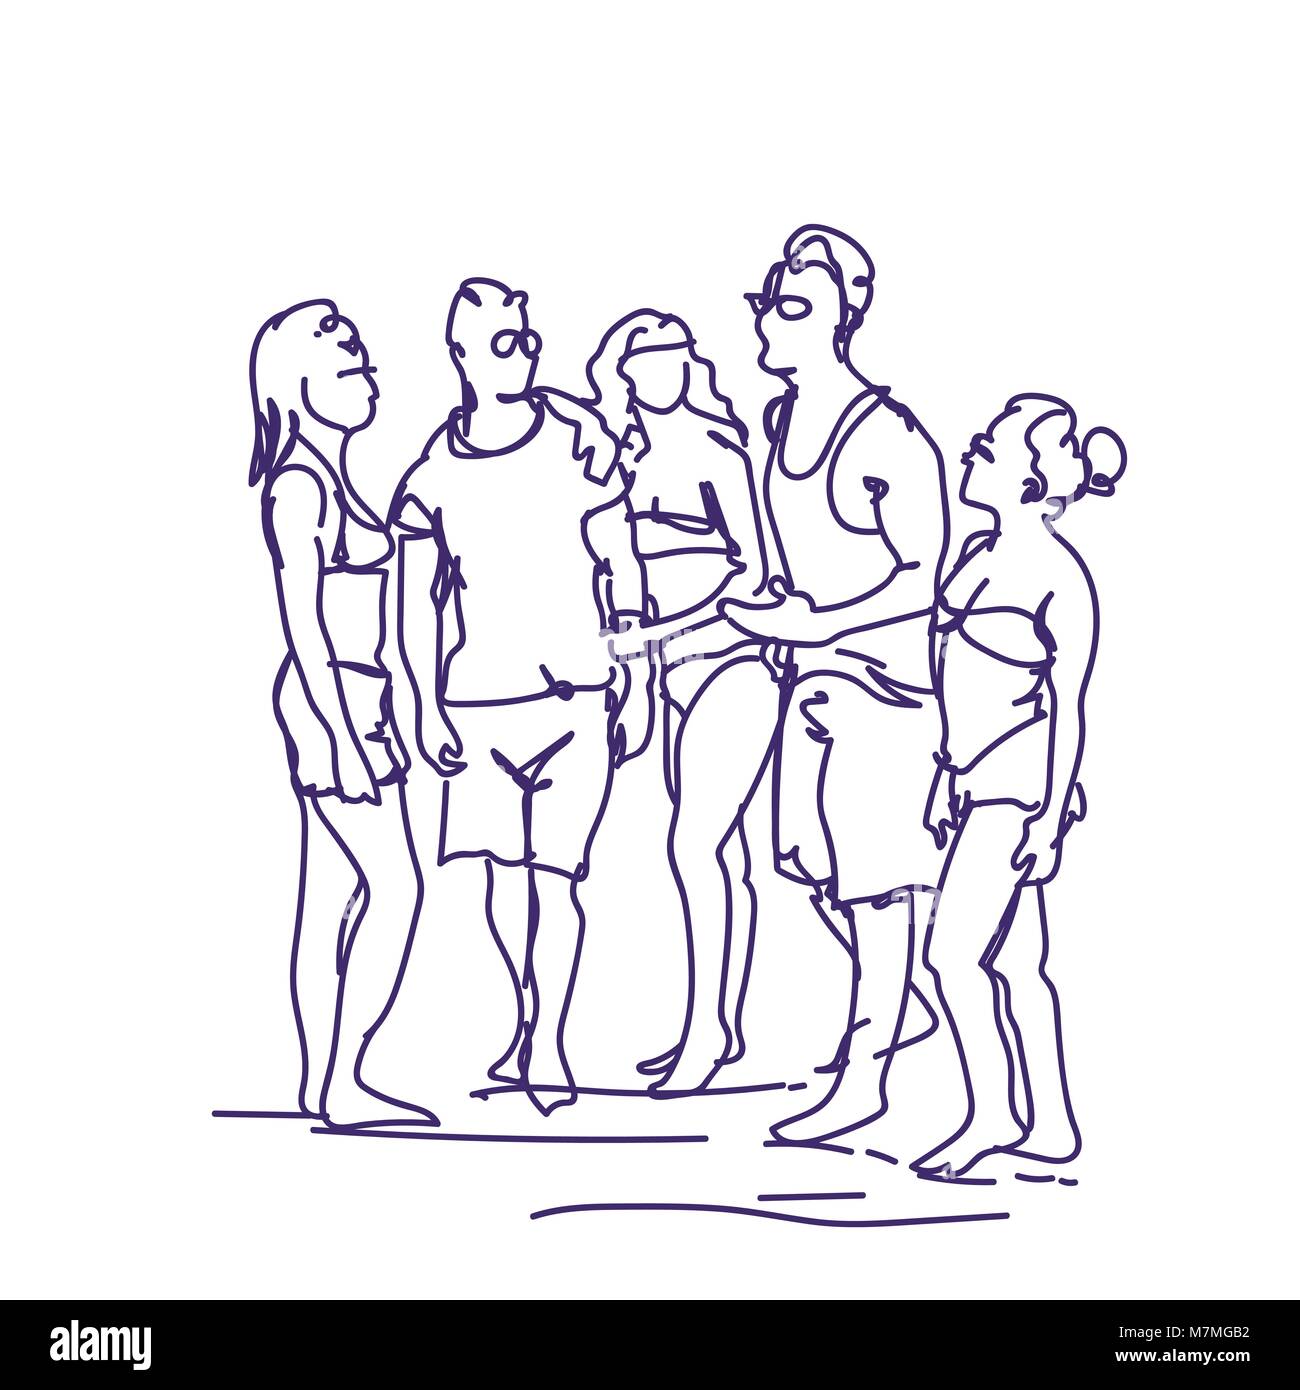 Single Continuous Line Drawing Group Of Young Business People Unite Their  Hands Together To Form A Circle Shape As A Unity Symbol Teamwork Concept  One Line Draw Graphic Design Vector Illustration Royalty